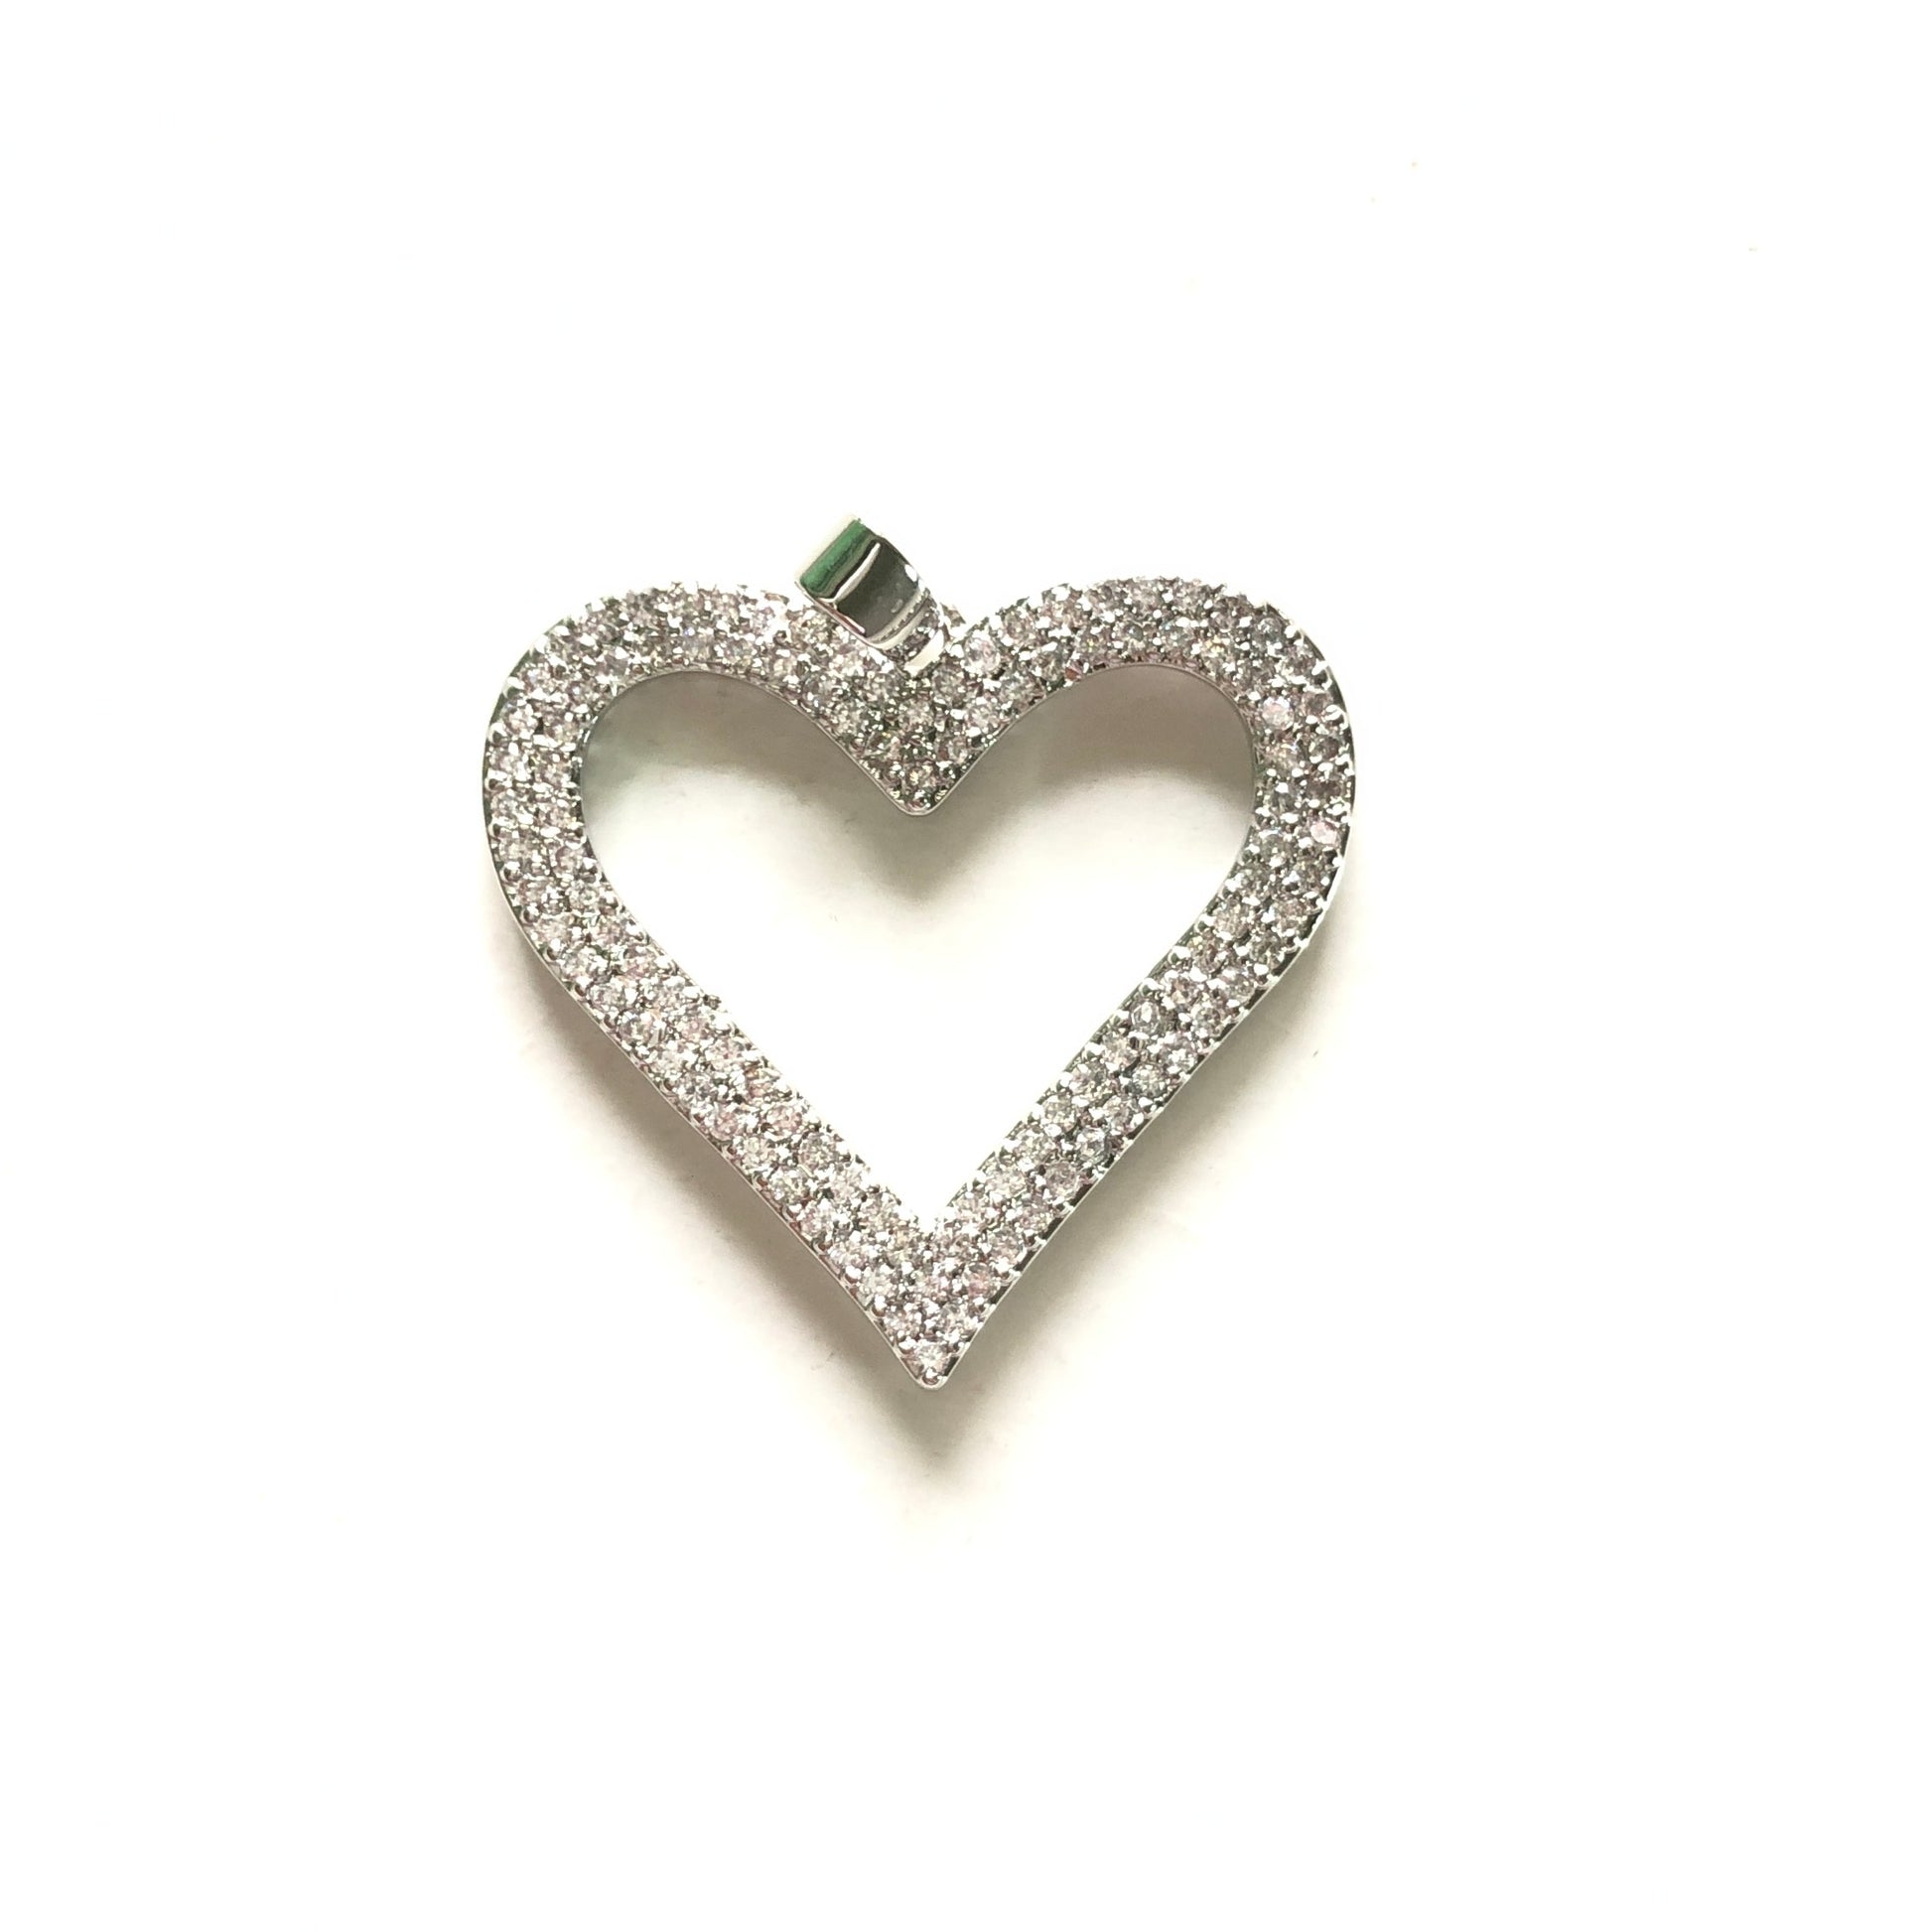 10pcs/lot 25*24mm CZ Paved Heart Charms Silver CZ Paved Charms Hearts Charms Beads Beyond